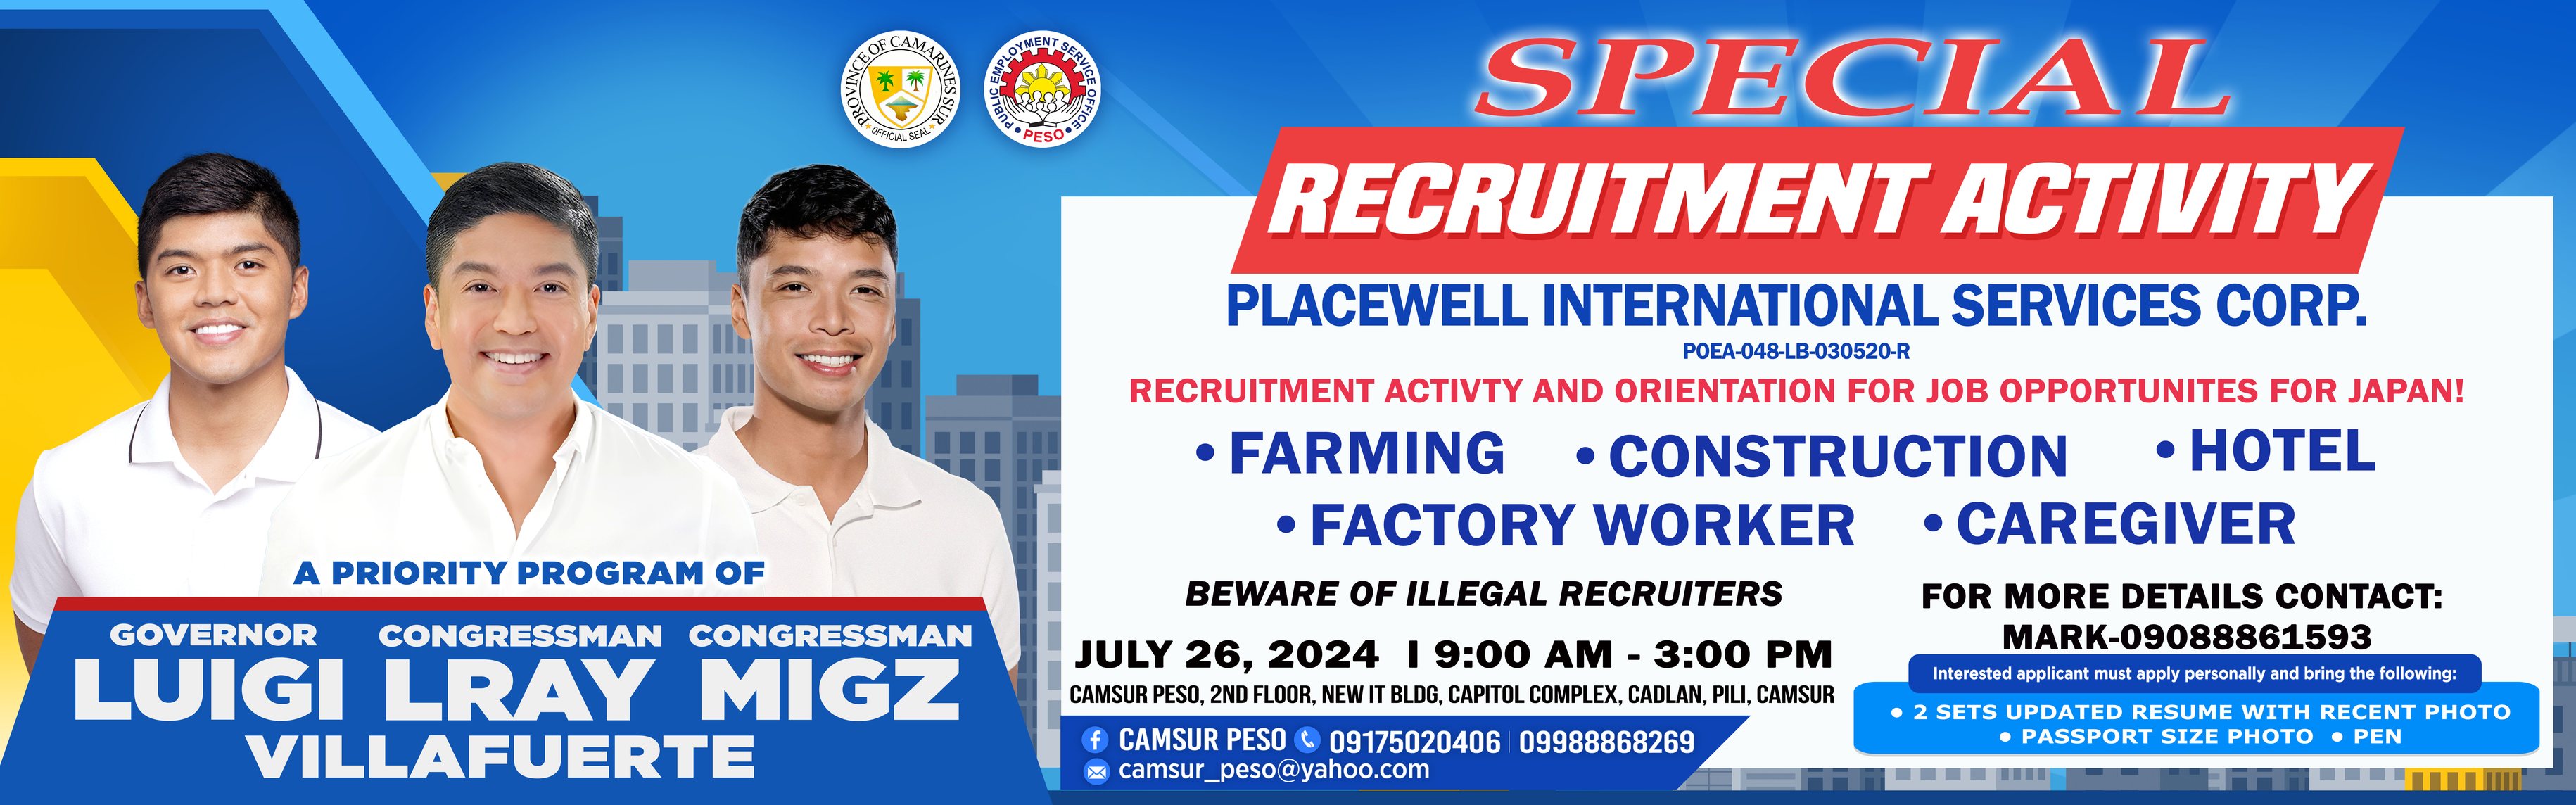 SPECIAL RECRUITMENT ACTIVITY (SRA) and ORIENTATION of PLACEWELL INTERNATIONAL SERVICES CORP.